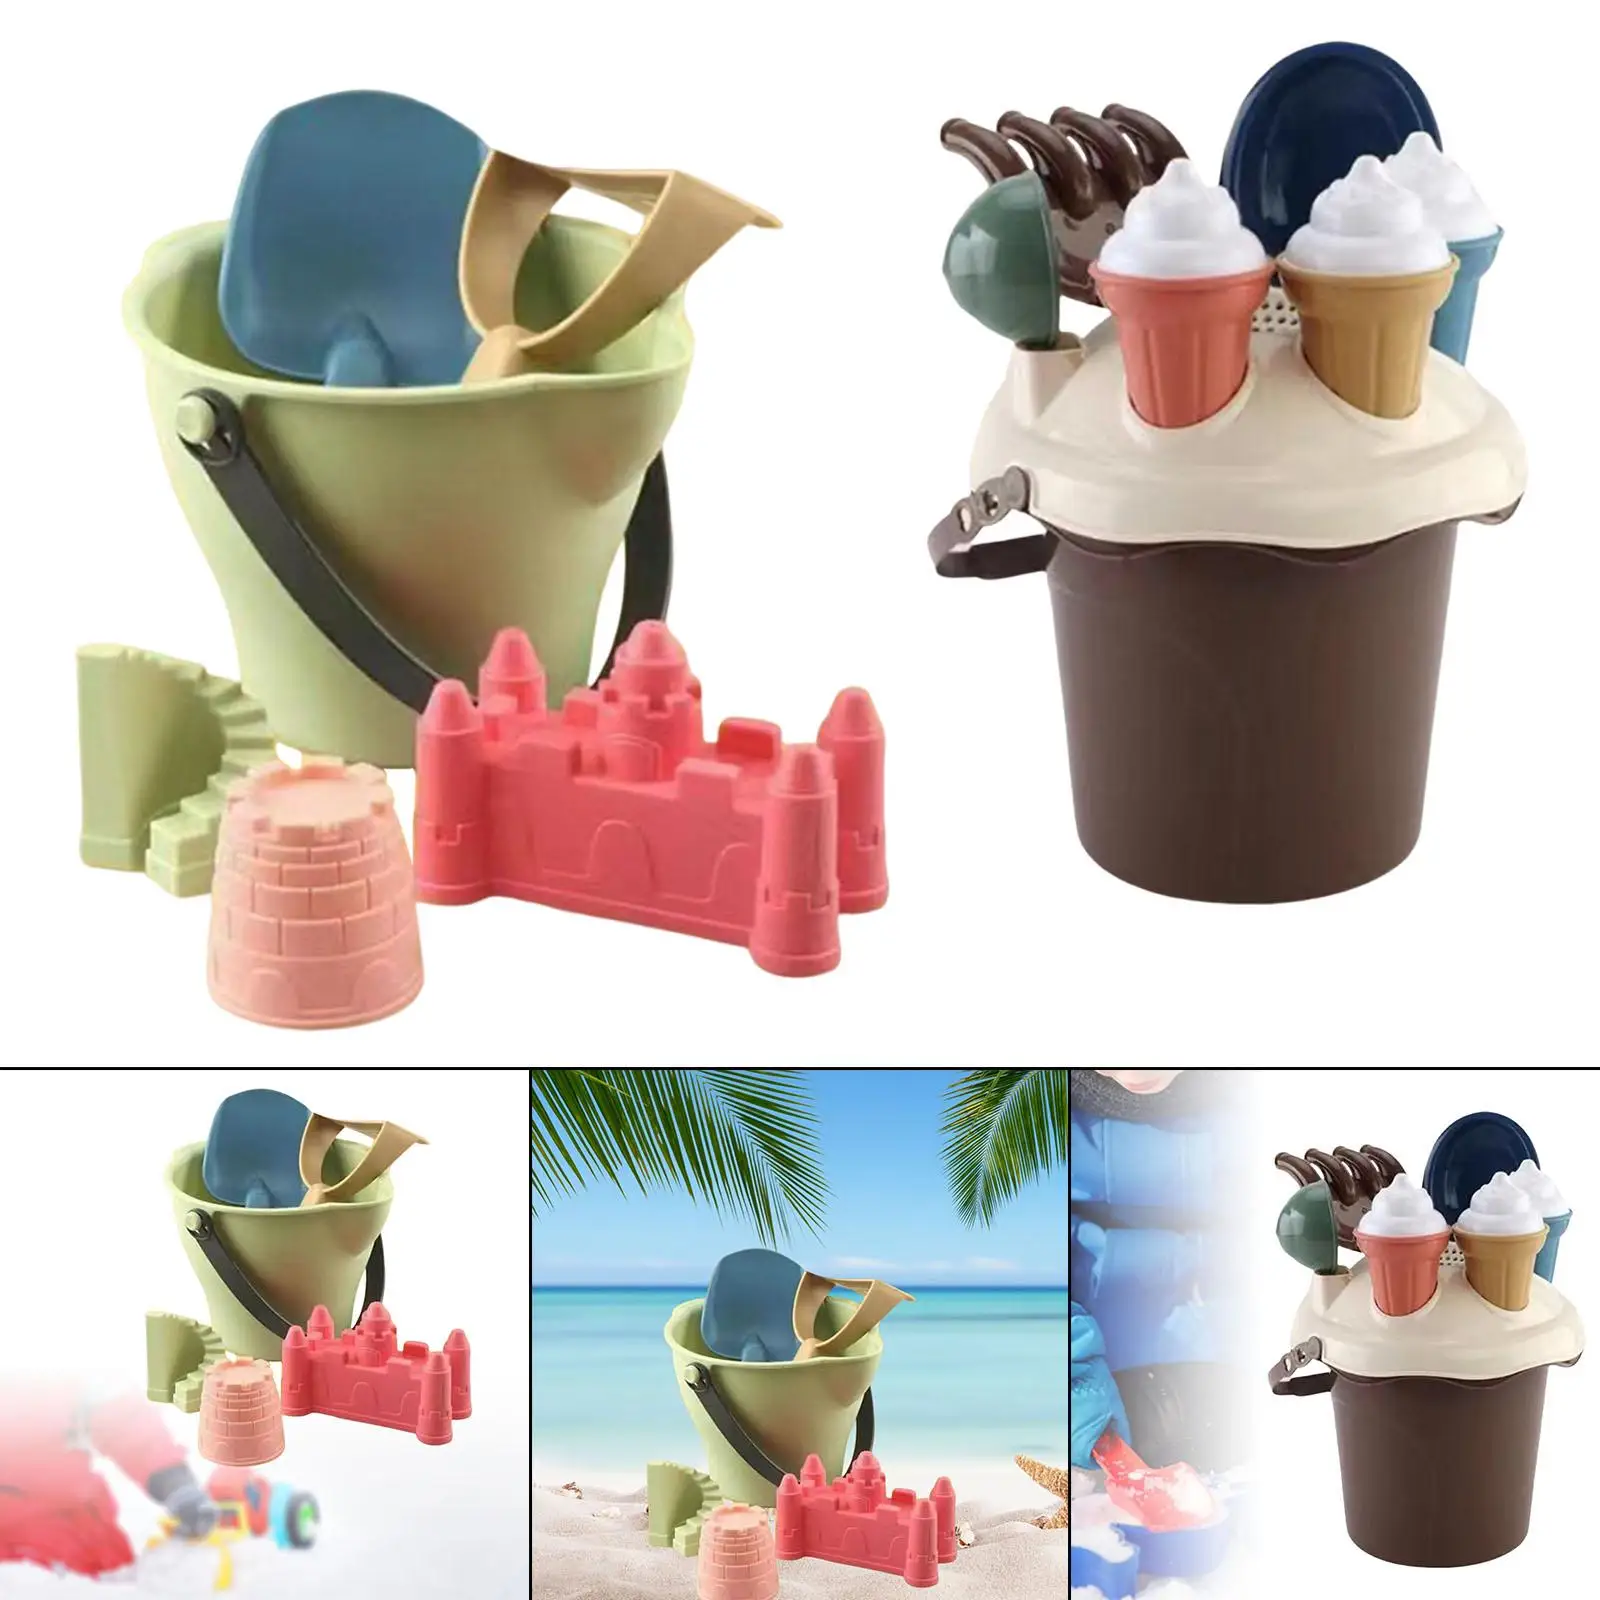 Travel Sand  Set Outdoor Indoor Play Gift Beach Tool Set Sandpit Toys for Kids Boys Girls Toddlers